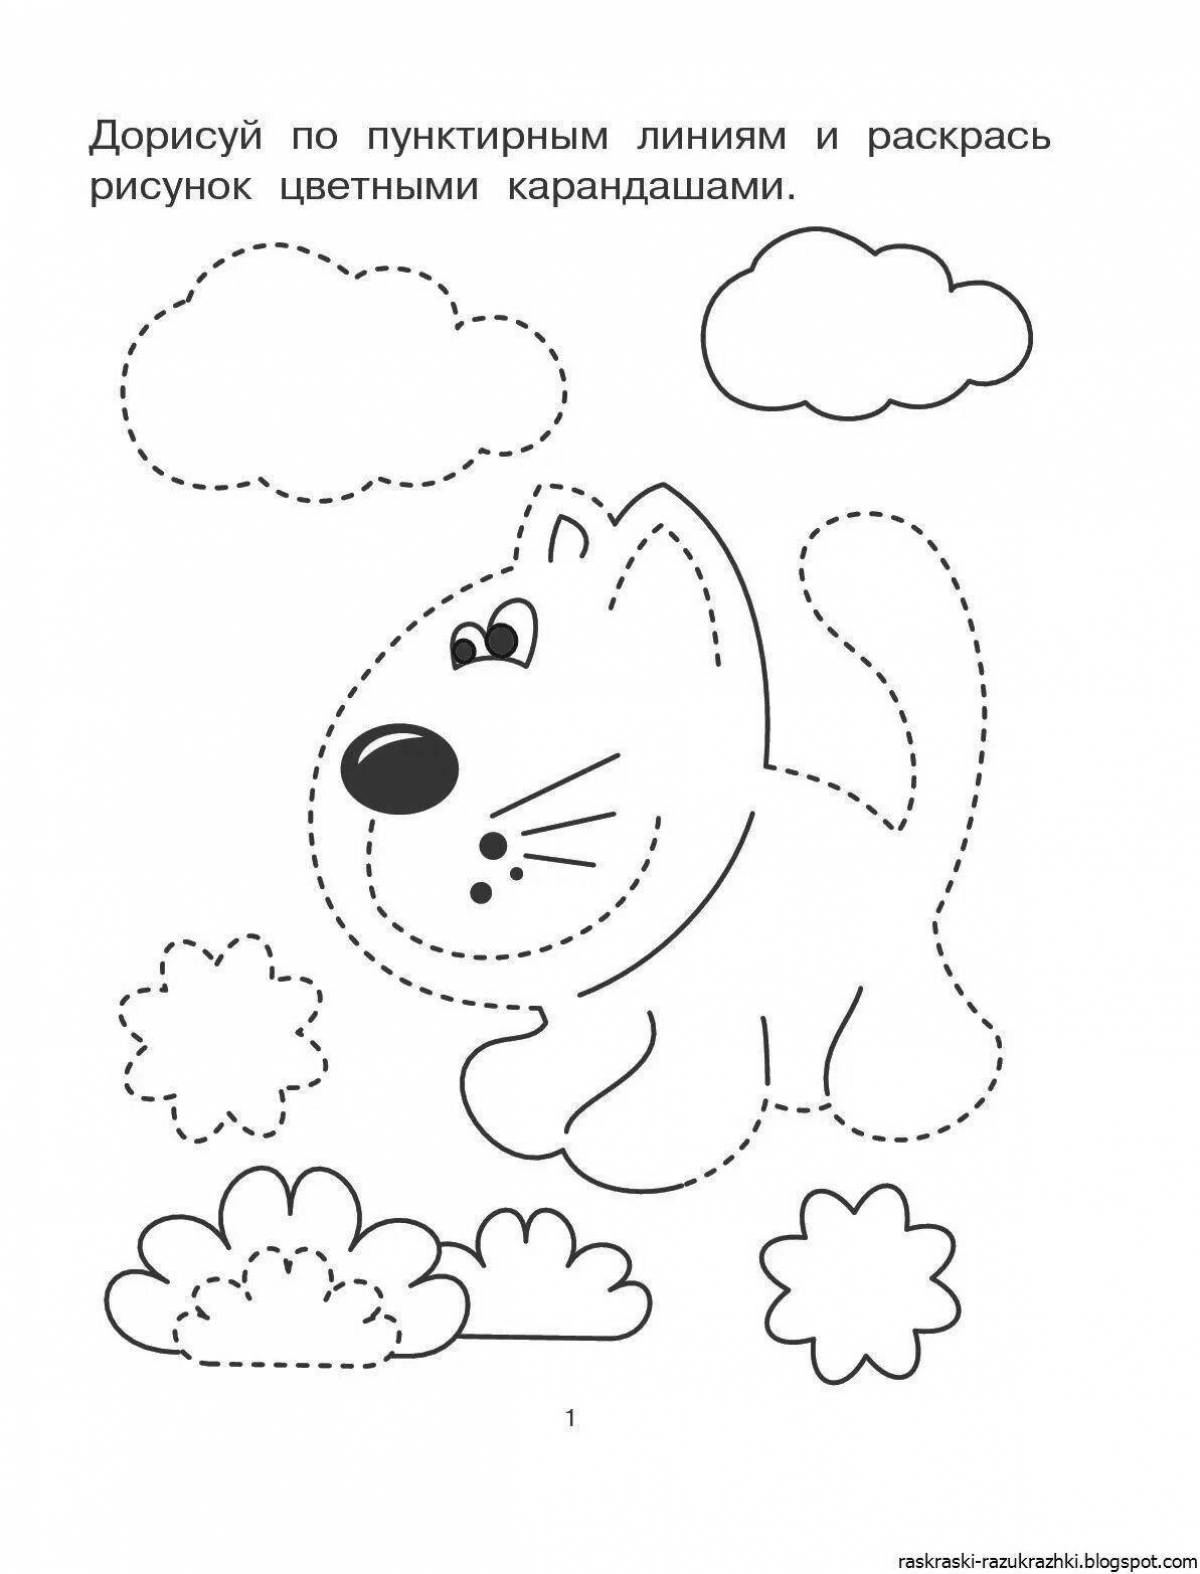 Entertaining coloring book for children 4 years old